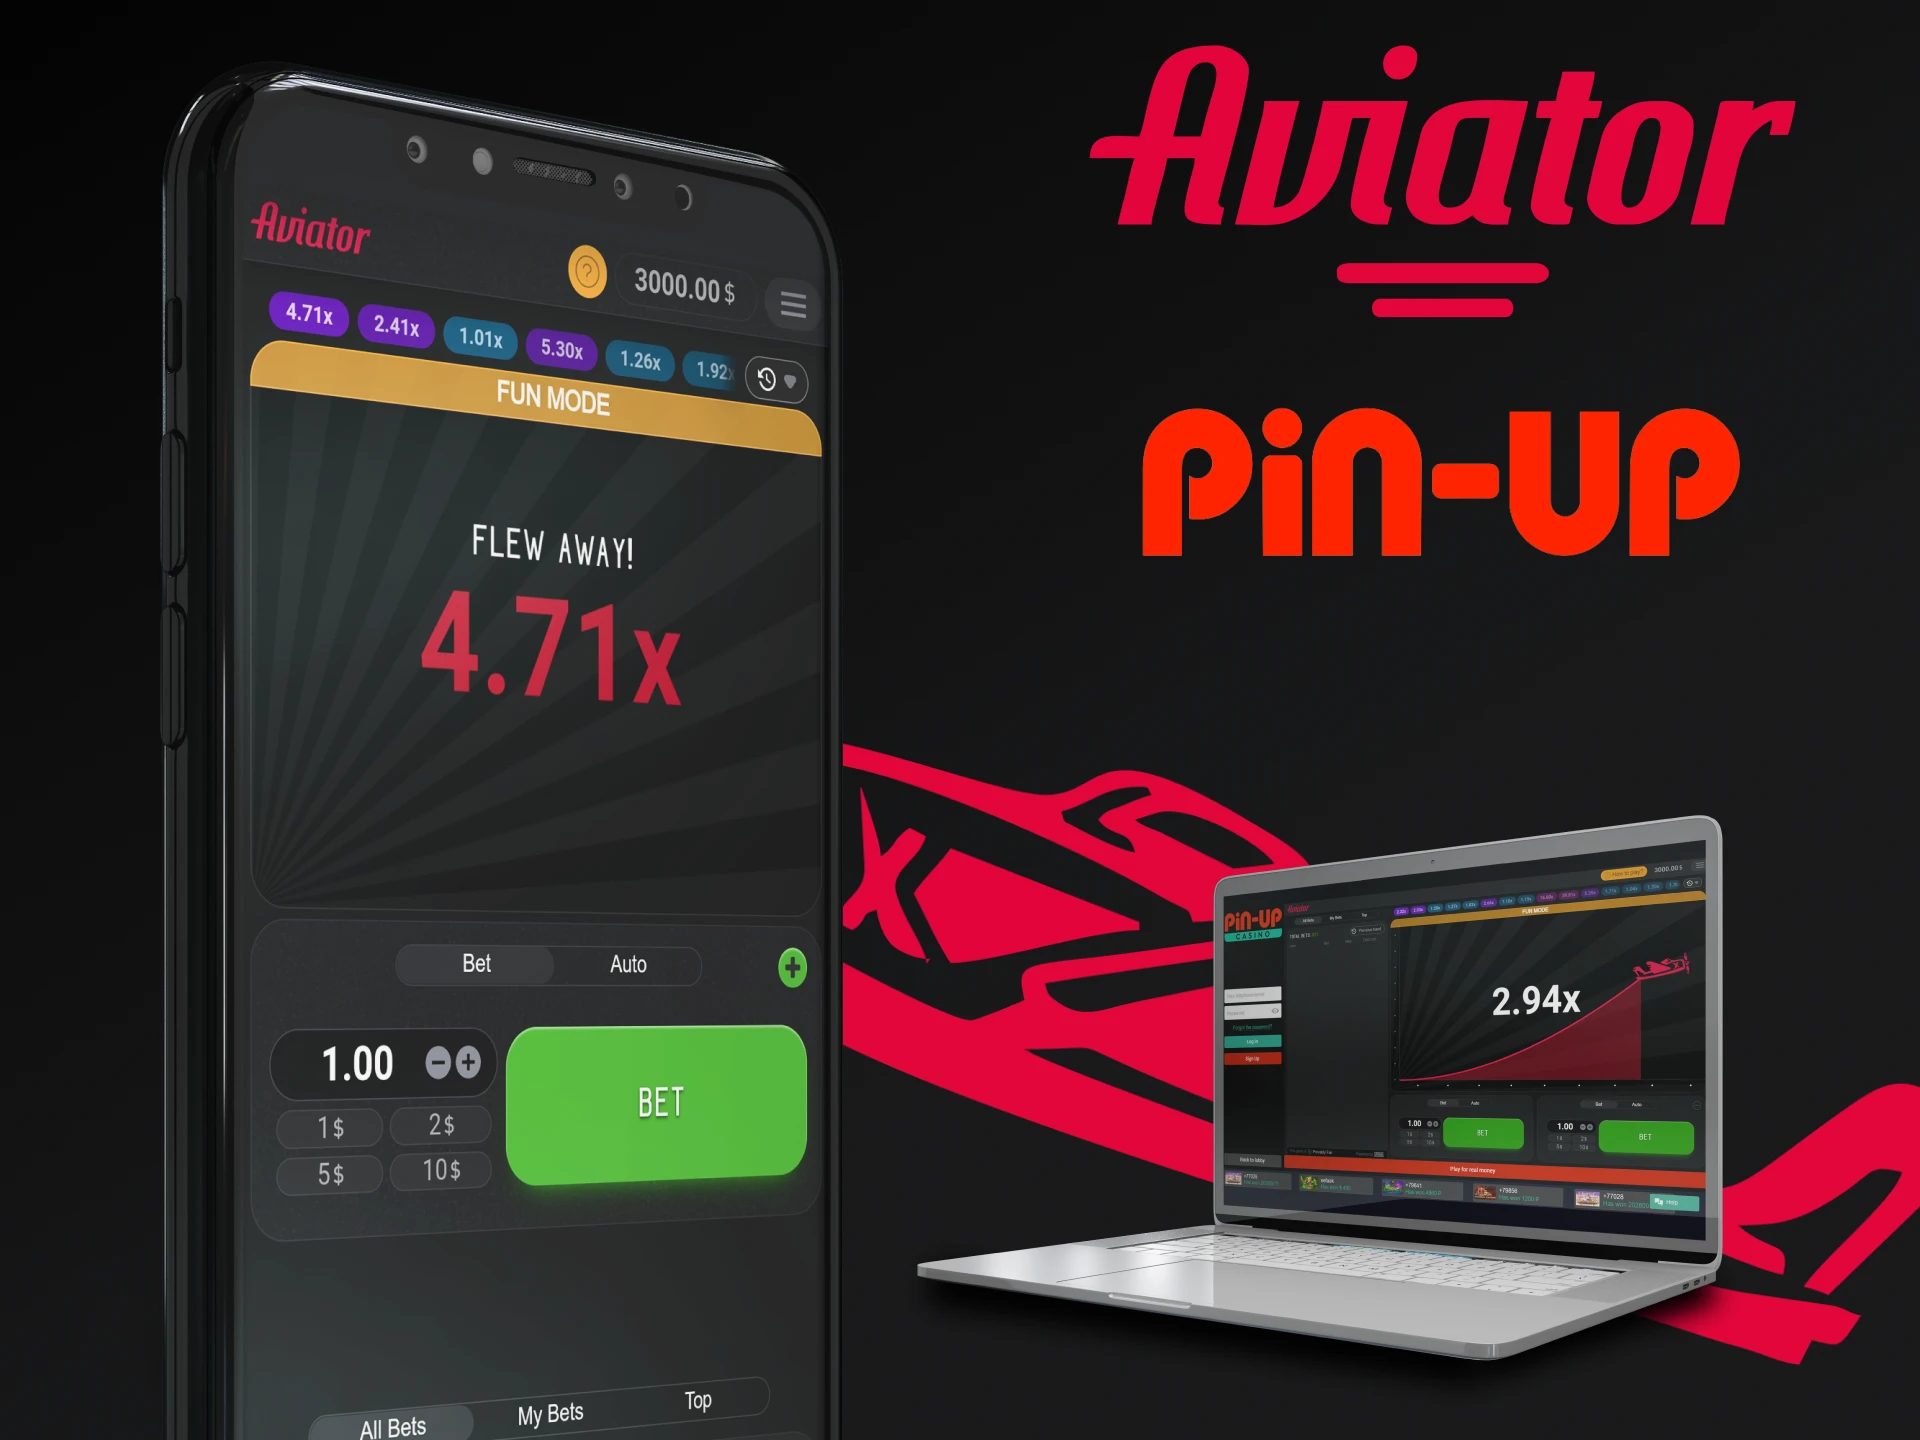 The game Aviator from PinUp can be played both through the application and through the web version of the site.